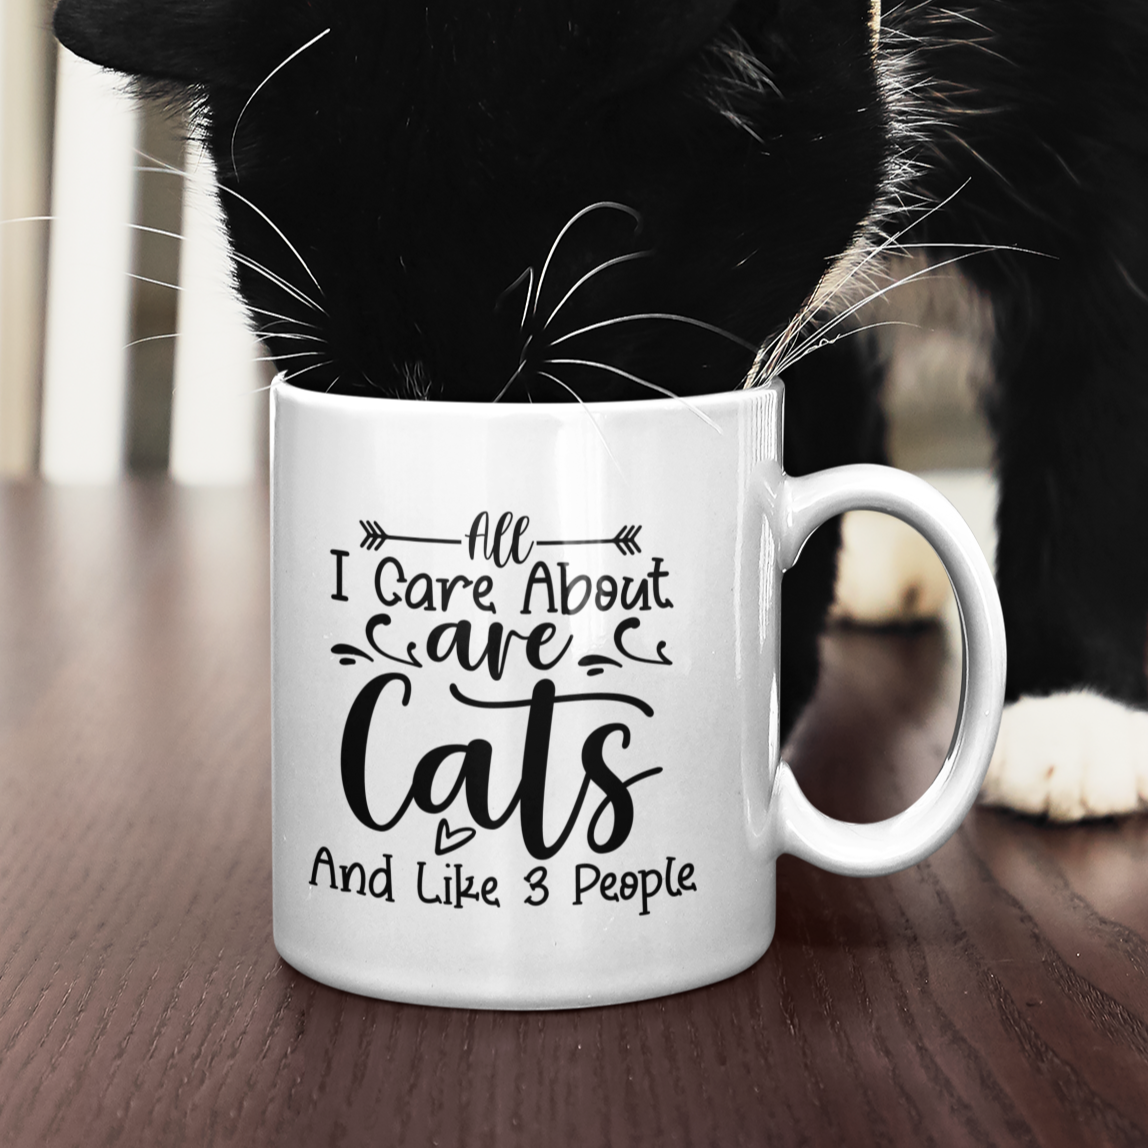 All I Care About Are Cats And Like 3 People Mug